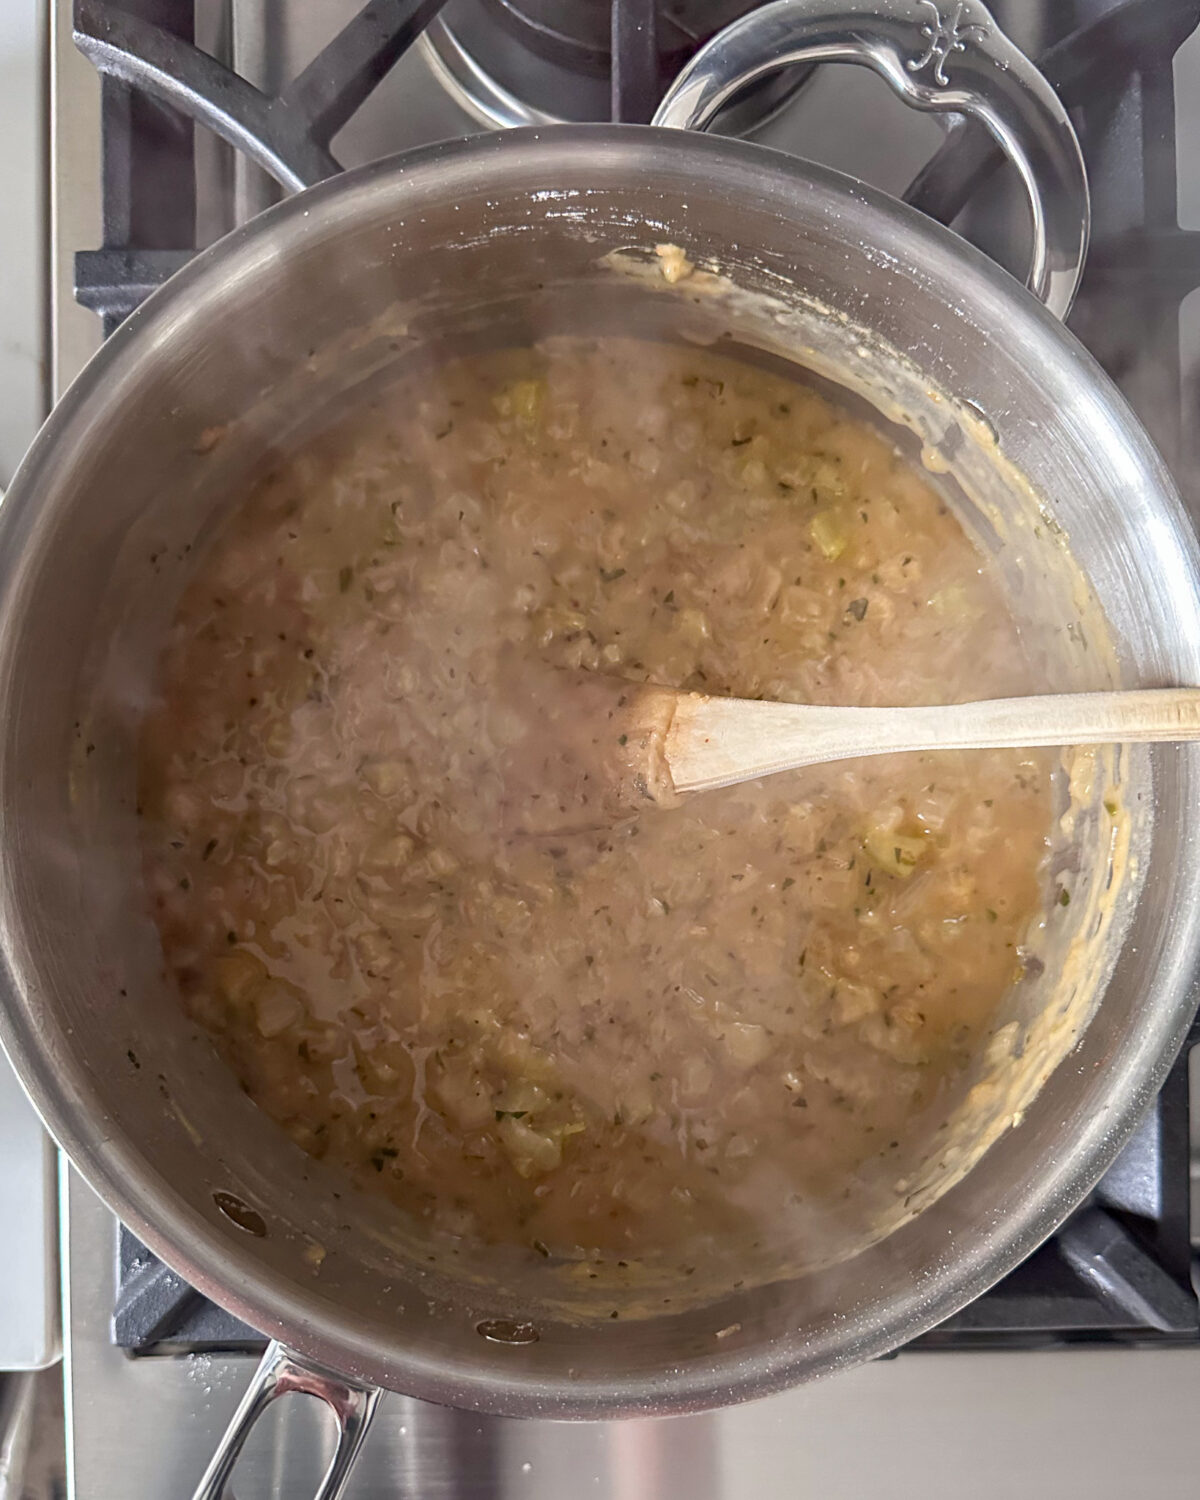 Add the warm chicken concentrate, ¼ cup at a time, stirring constantly, and scraping the pan clean before adding the next ¼ cup. Next add the warm half & half, ½ cup at a time, stirring constantly, and scraping the pan clean before adding the next ½ cup.